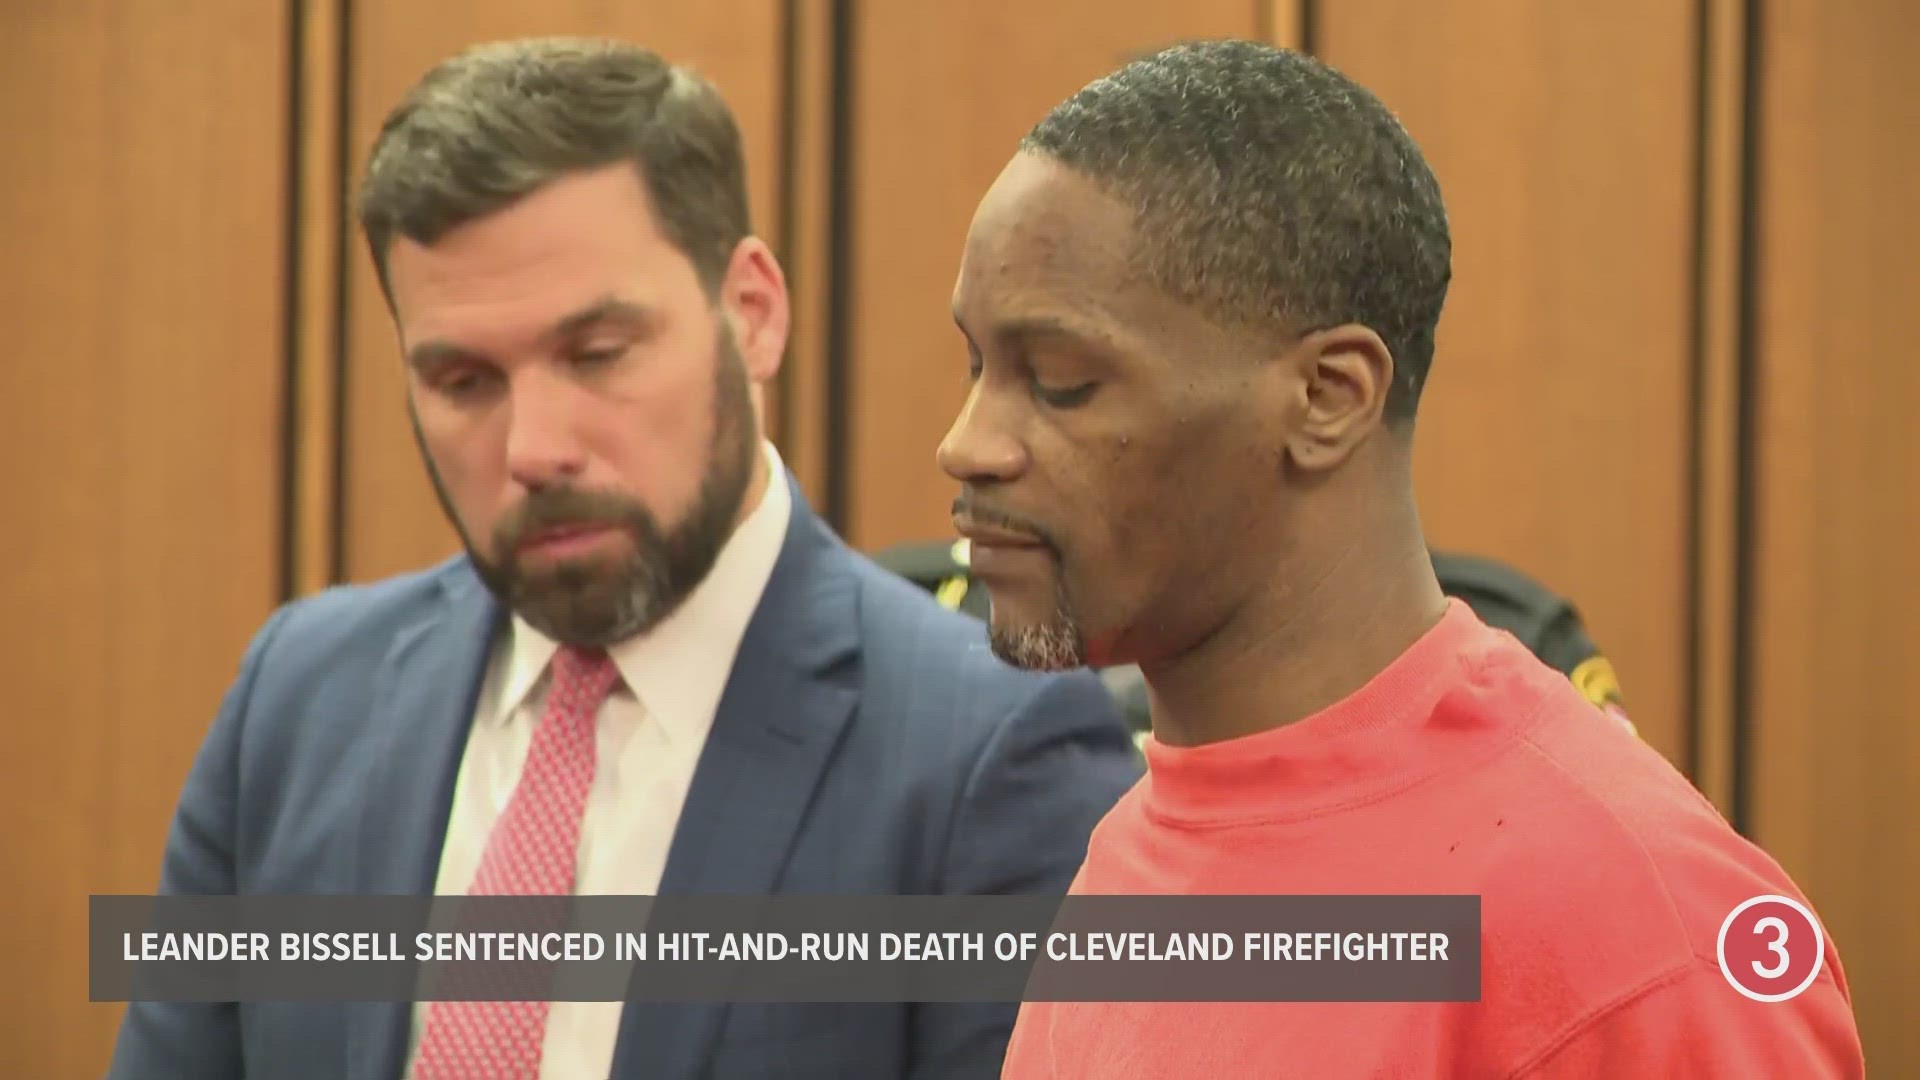 Leander Bissell offered this statement and apology before being sentenced in the November 2022 hit-and-run death of Cleveland firefighter Johnny Tetrick.